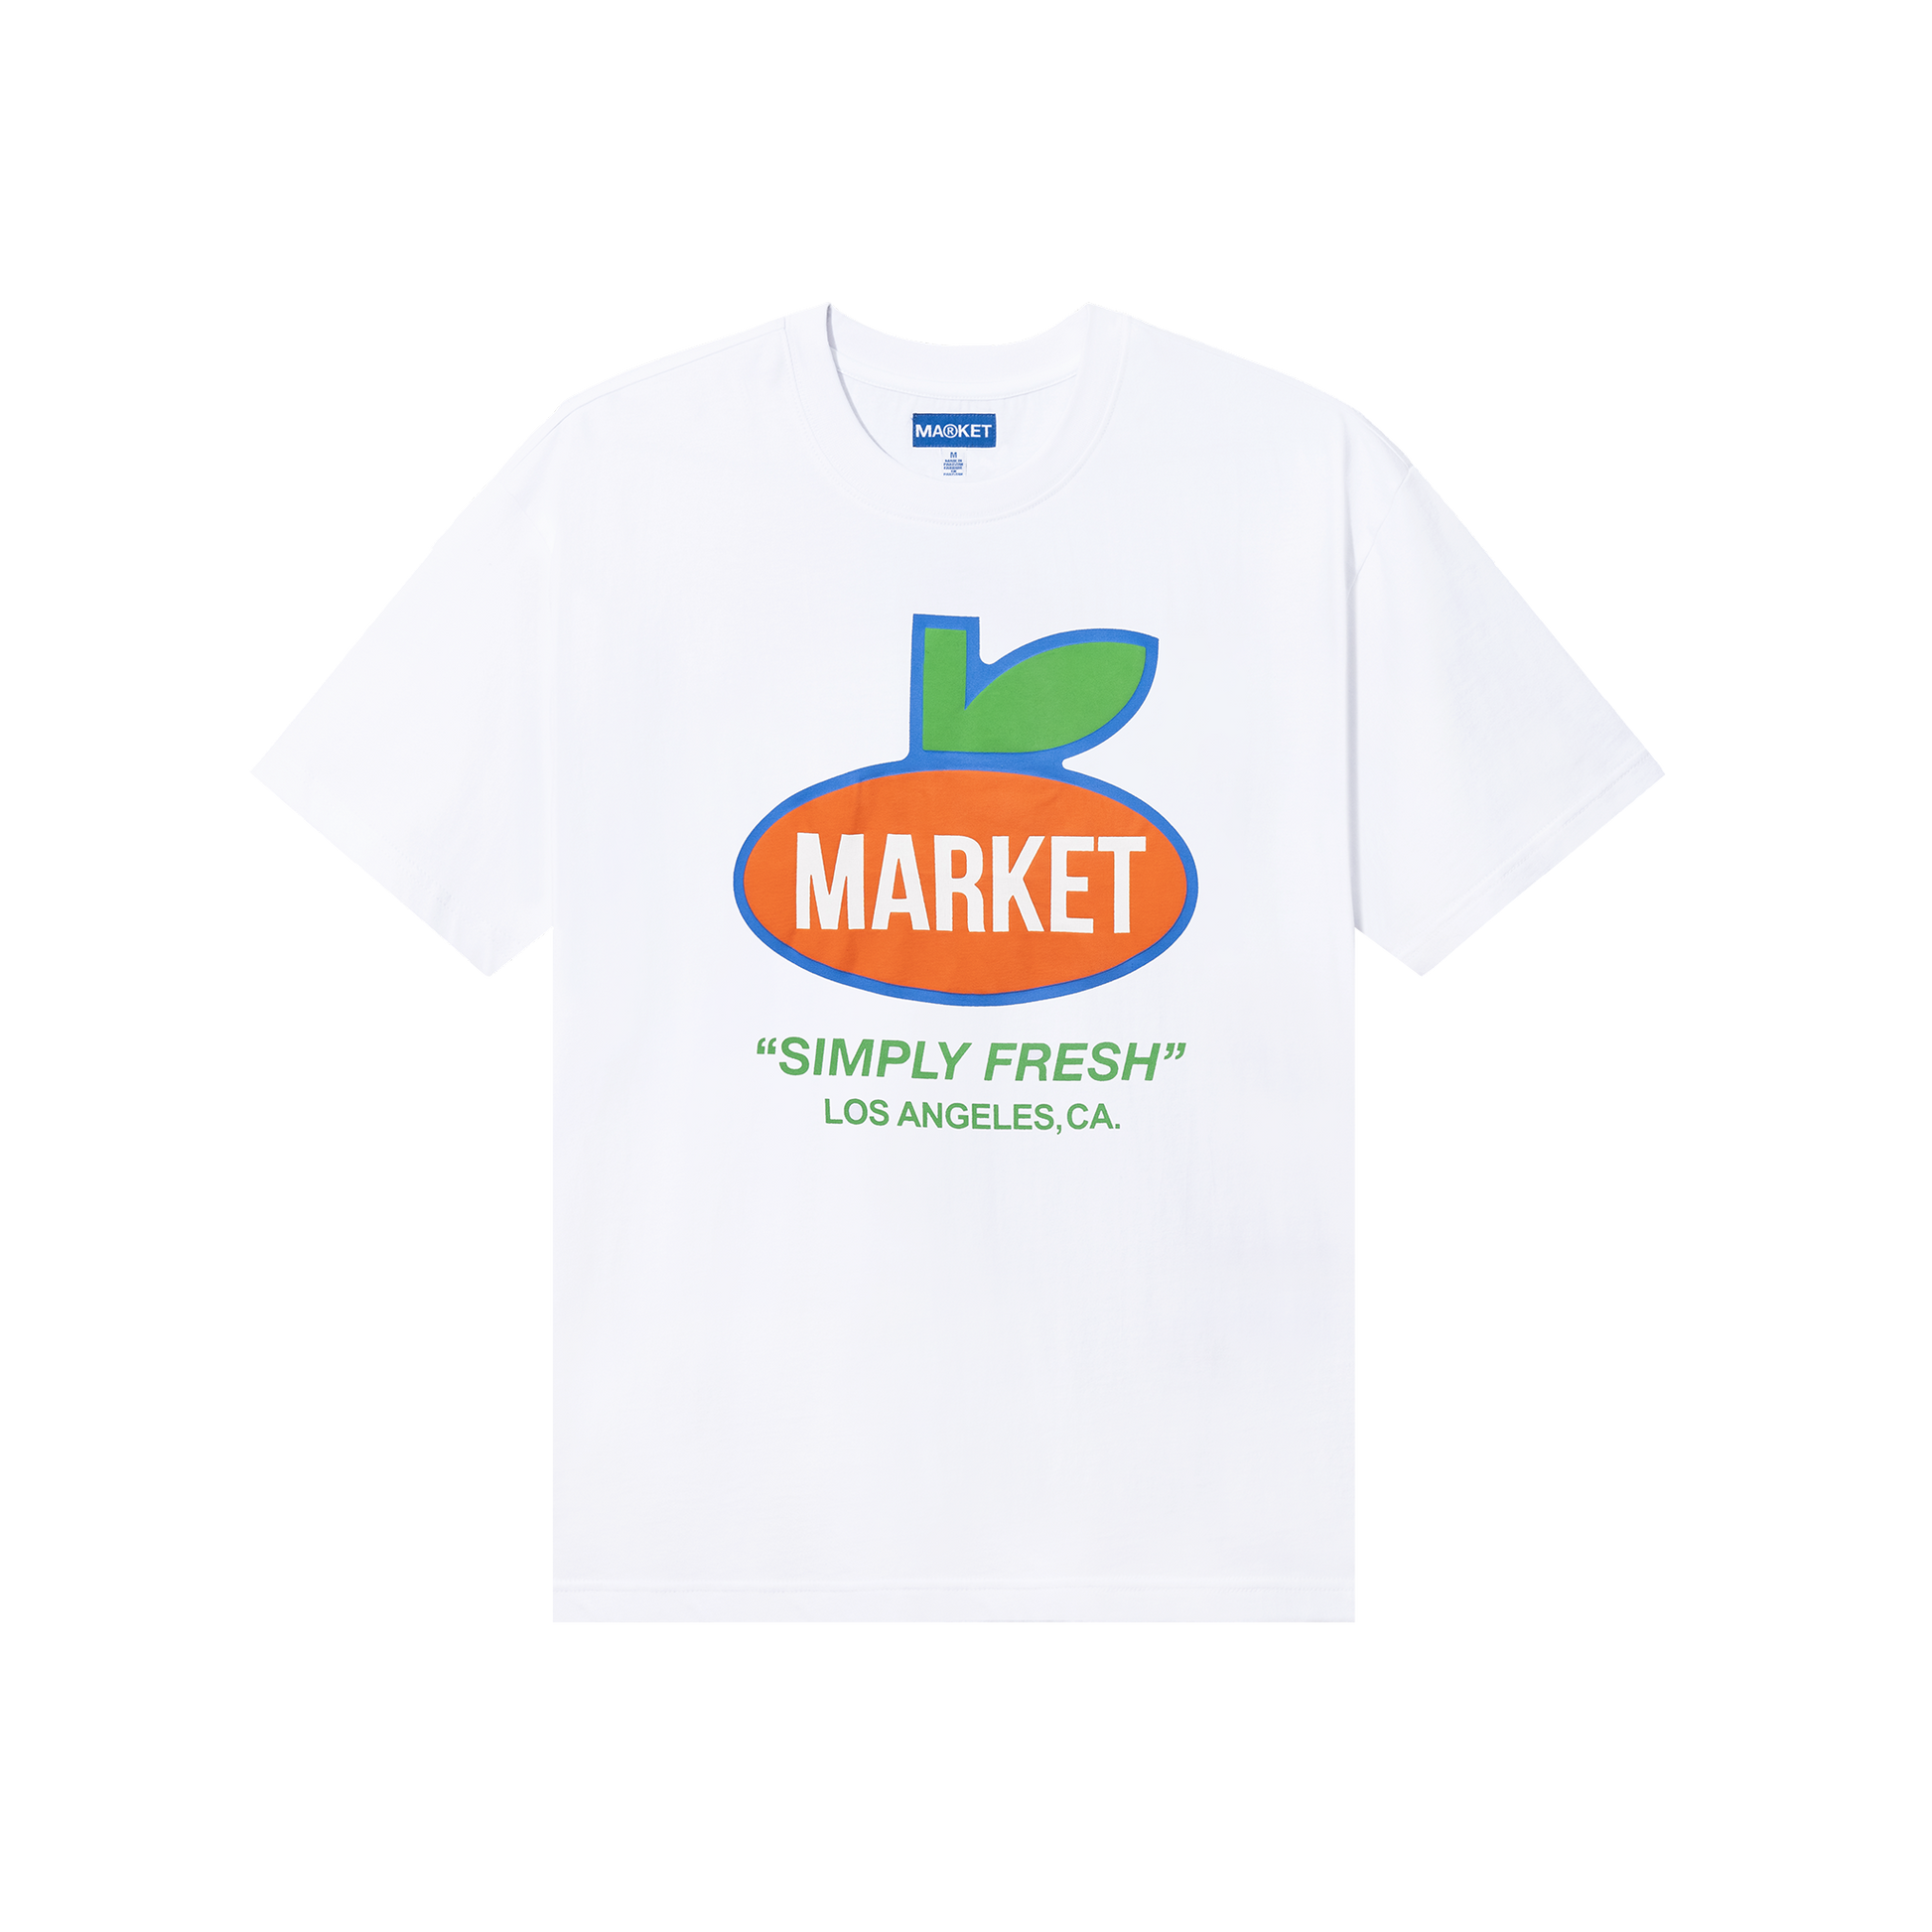 MARKET clothing brand SIMPLY FRESH T-SHIRT. Find more graphic tees, hats, hoodies and more at MarketStudios.com. Formally Chinatown Market.